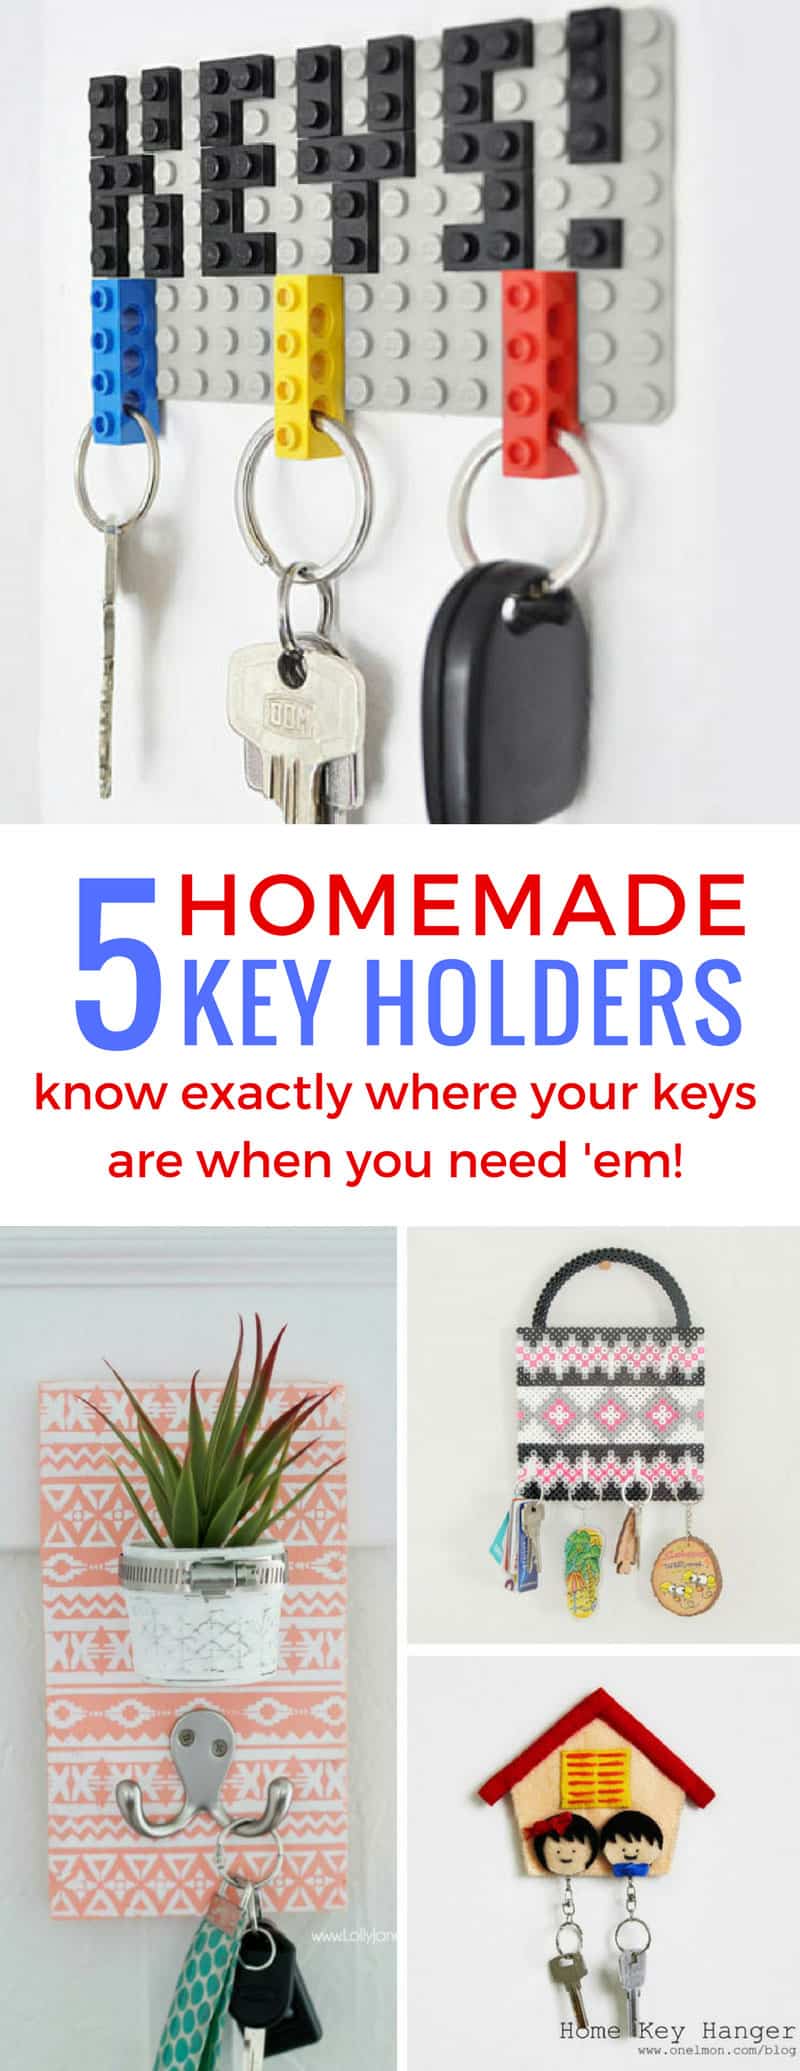 These homemade key holder DIY ideas are just what I need to keep my keys safe and sound!